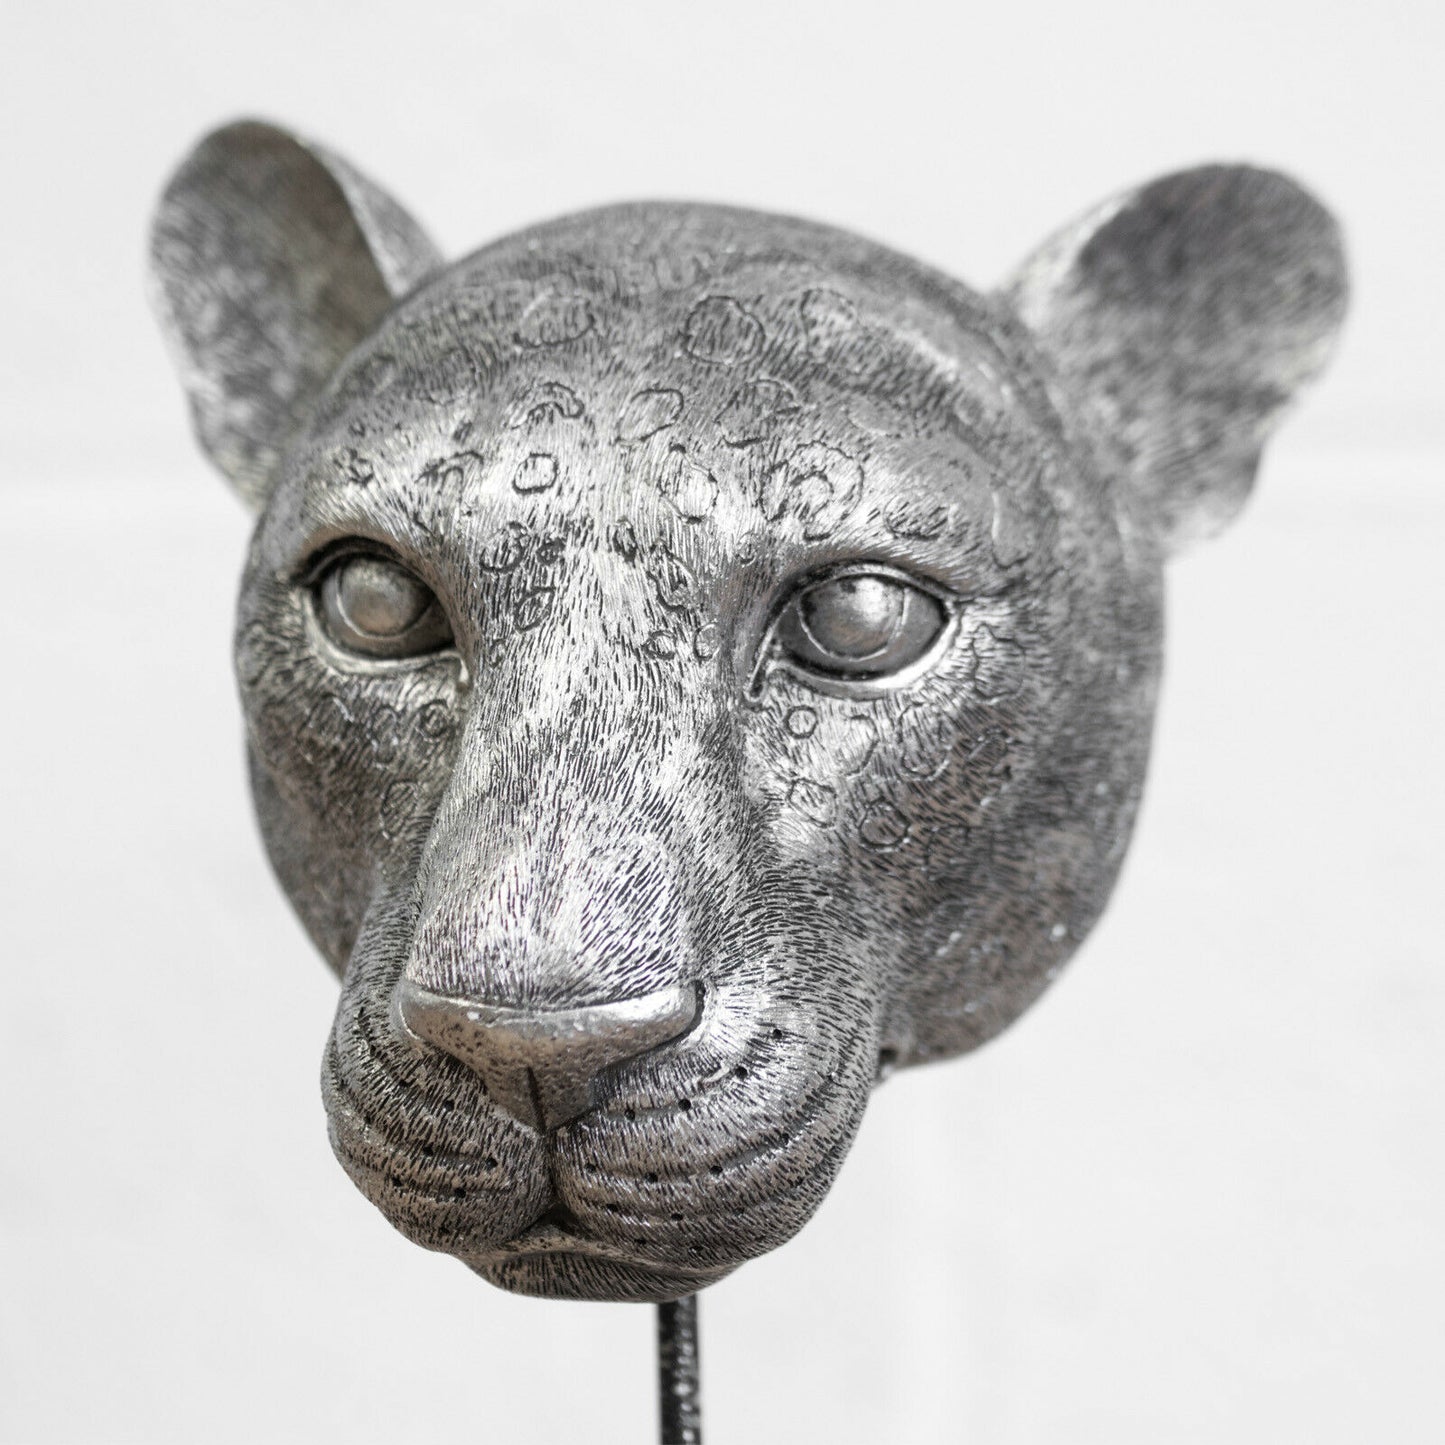 Leopard Head on Stand Ornament Silver 26.5cm